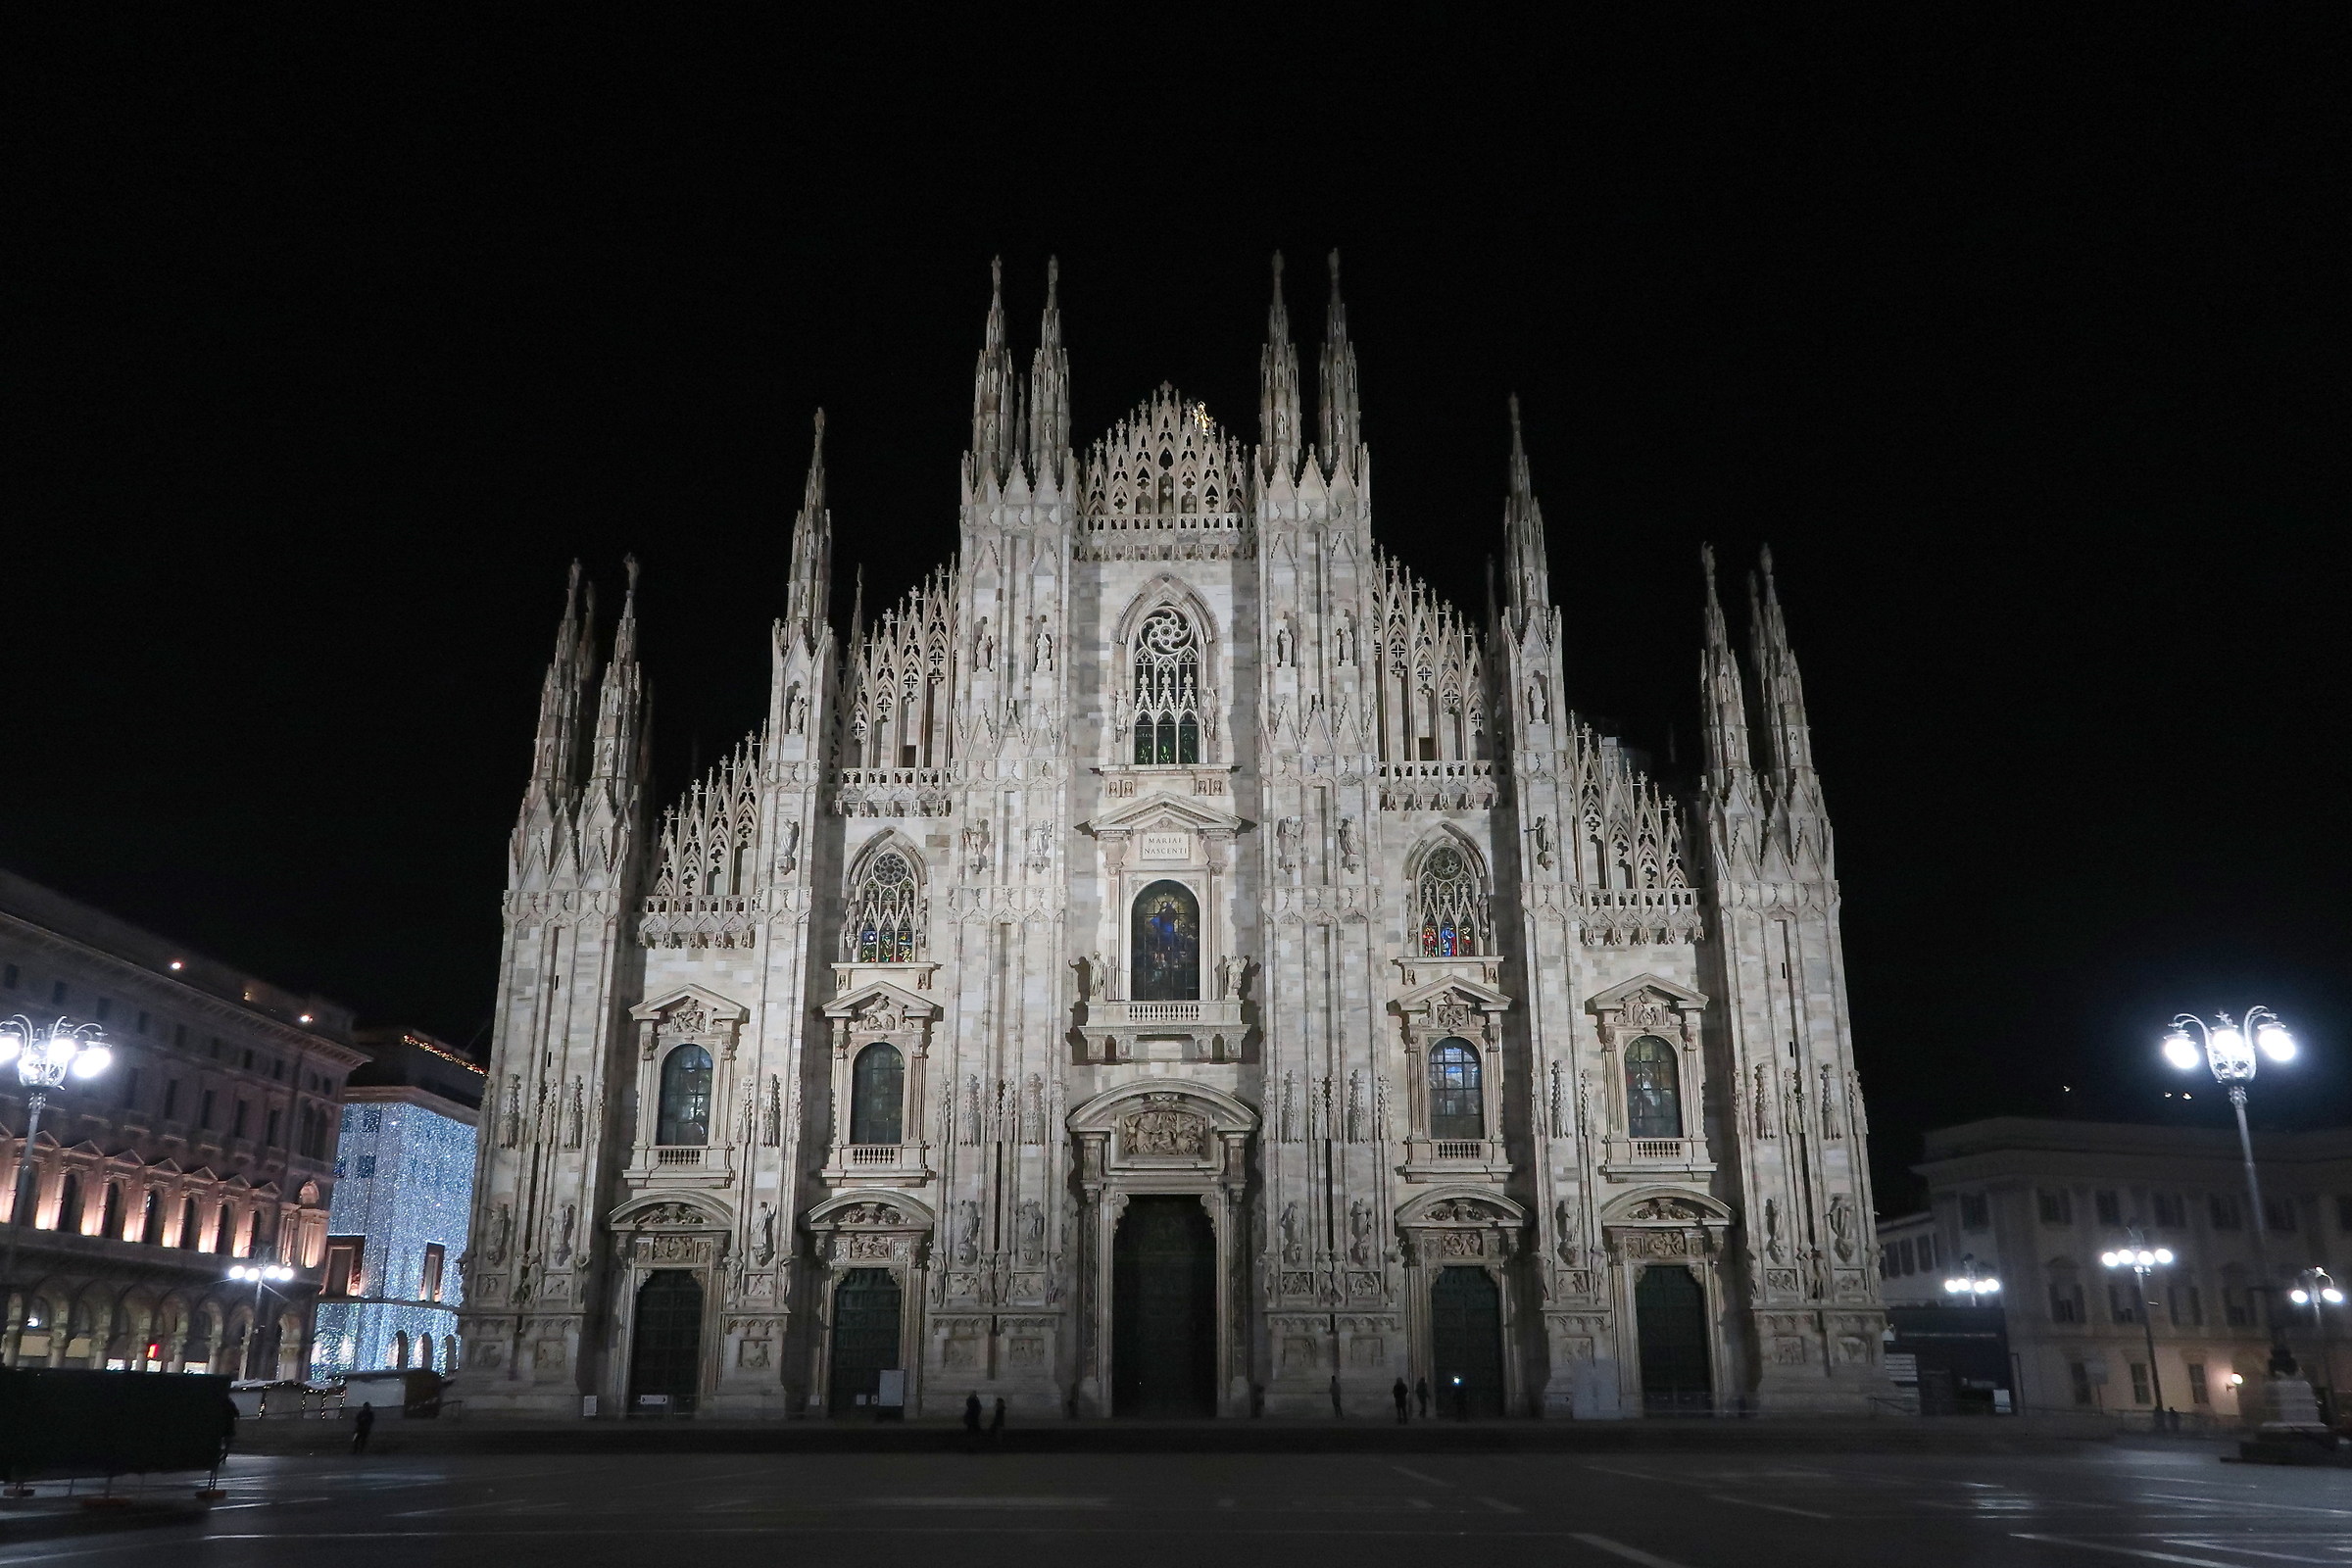 strange to see the Piazza del Duomo (Milan) deserted .... com...